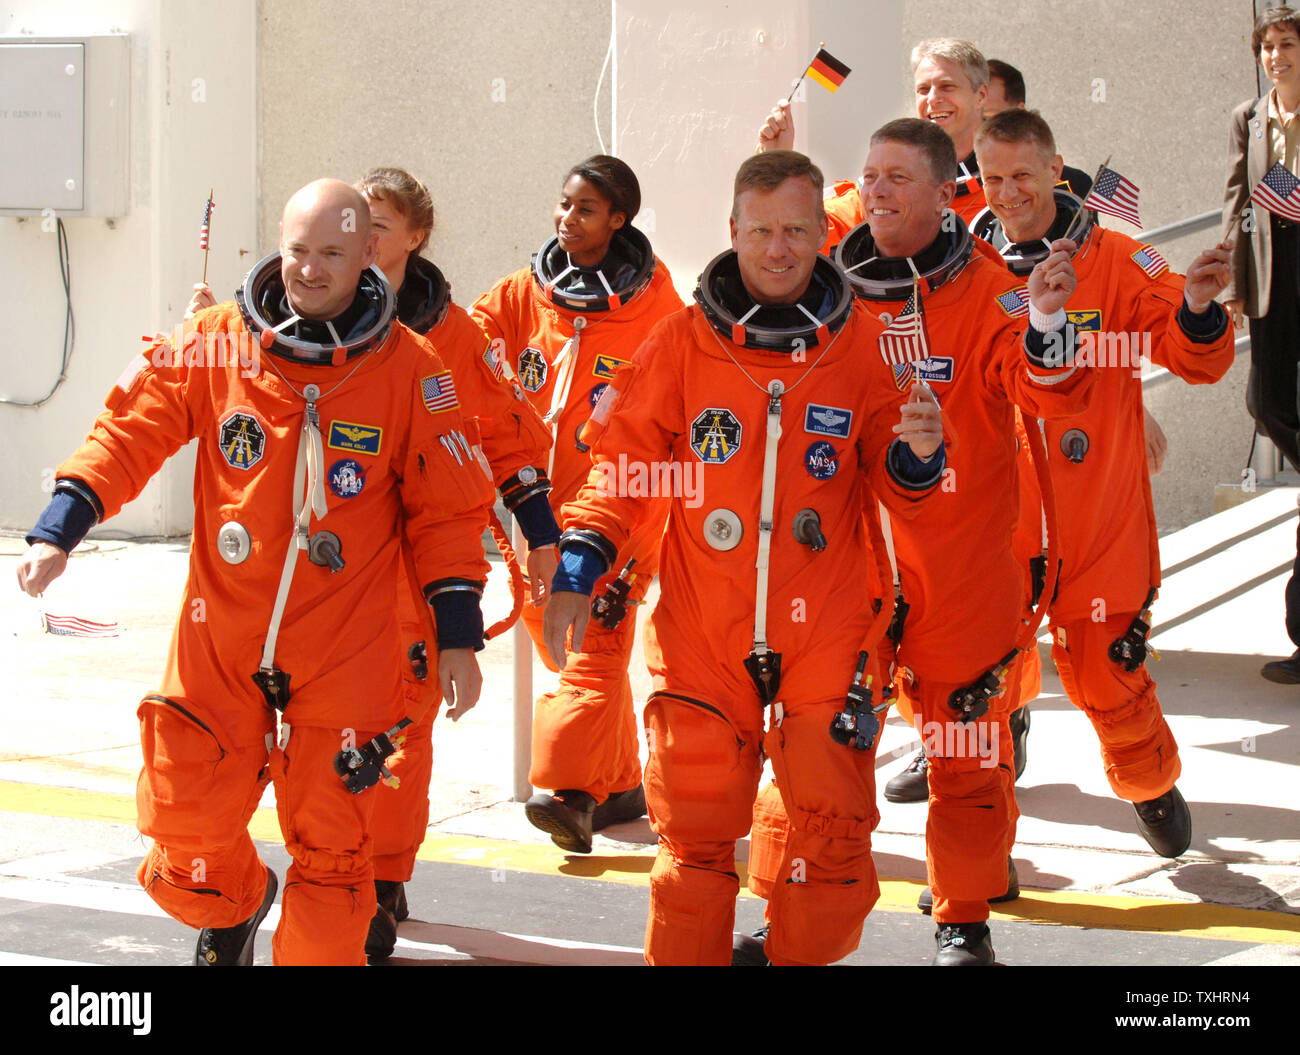 Commander Steven Lindsey (R) and Pilot Mark Kelly (L) wave American Flags as they lead Mission Specialists  Lisa Nowak (2nd Row,L), Michael Fossum (2nd row,R), Stephanie Wilson (3rd Row,L), Piers Sellers, (3rd Row,R), and Thomas Reiter (rear) of Germany, out of the Operations and Checkout Building to board the NASA Astrovan to board the Space Shuttle Discovery for mission STS-121 at Cape Canaveral, Florida on July 4, 2006.  Reiter is waving a German flag for the 4th of July launch. (UPI Photo/Pat Benic) Stock Photo